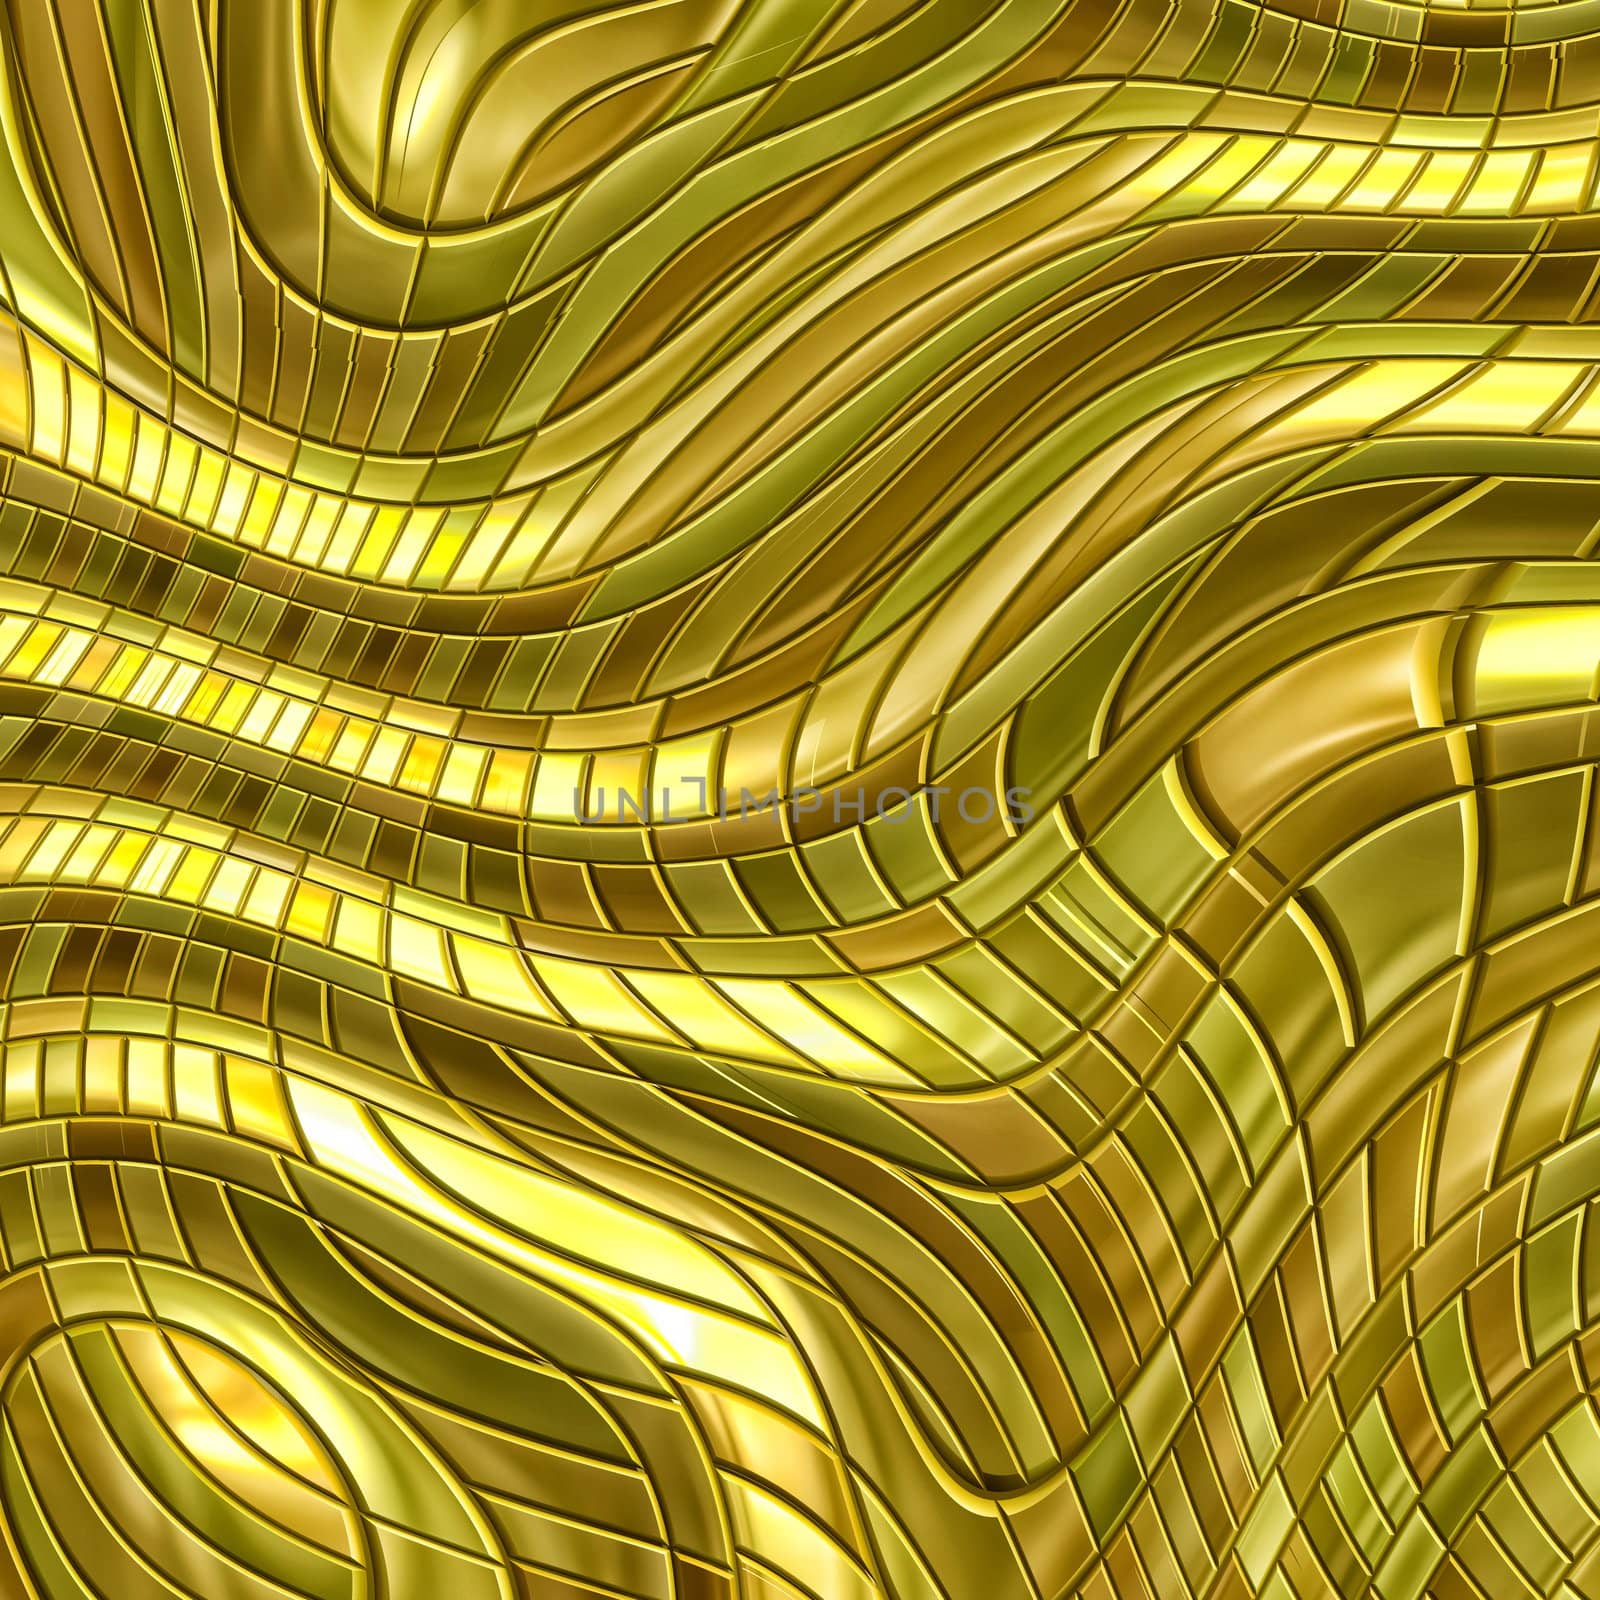 great image of an abstract gold metal background